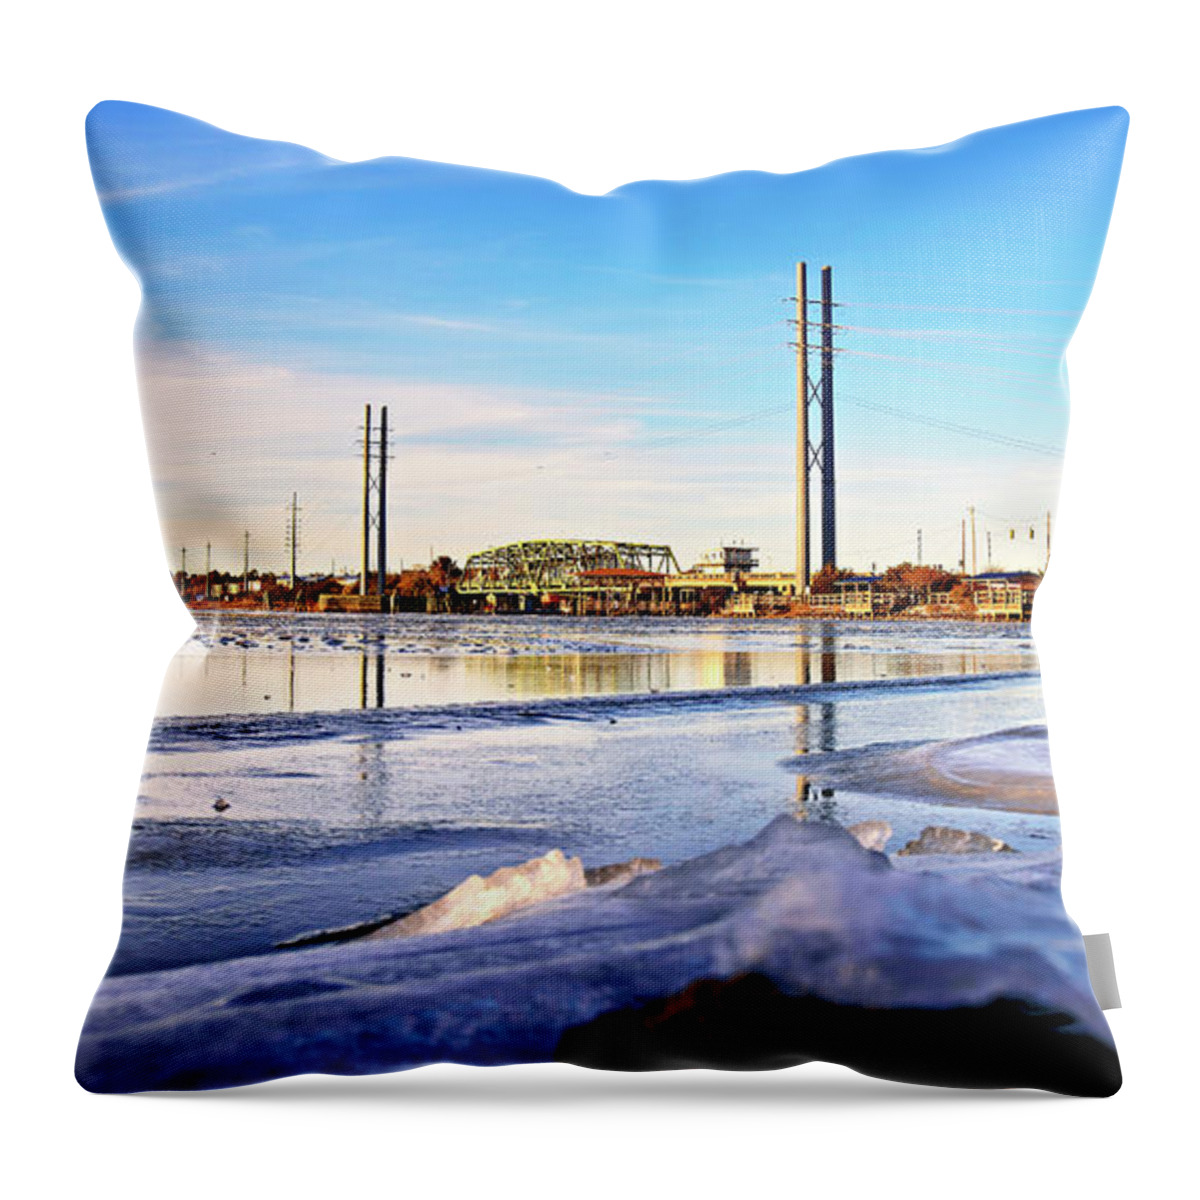 Surf City Throw Pillow featuring the photograph Frozen in Time by DJA Images